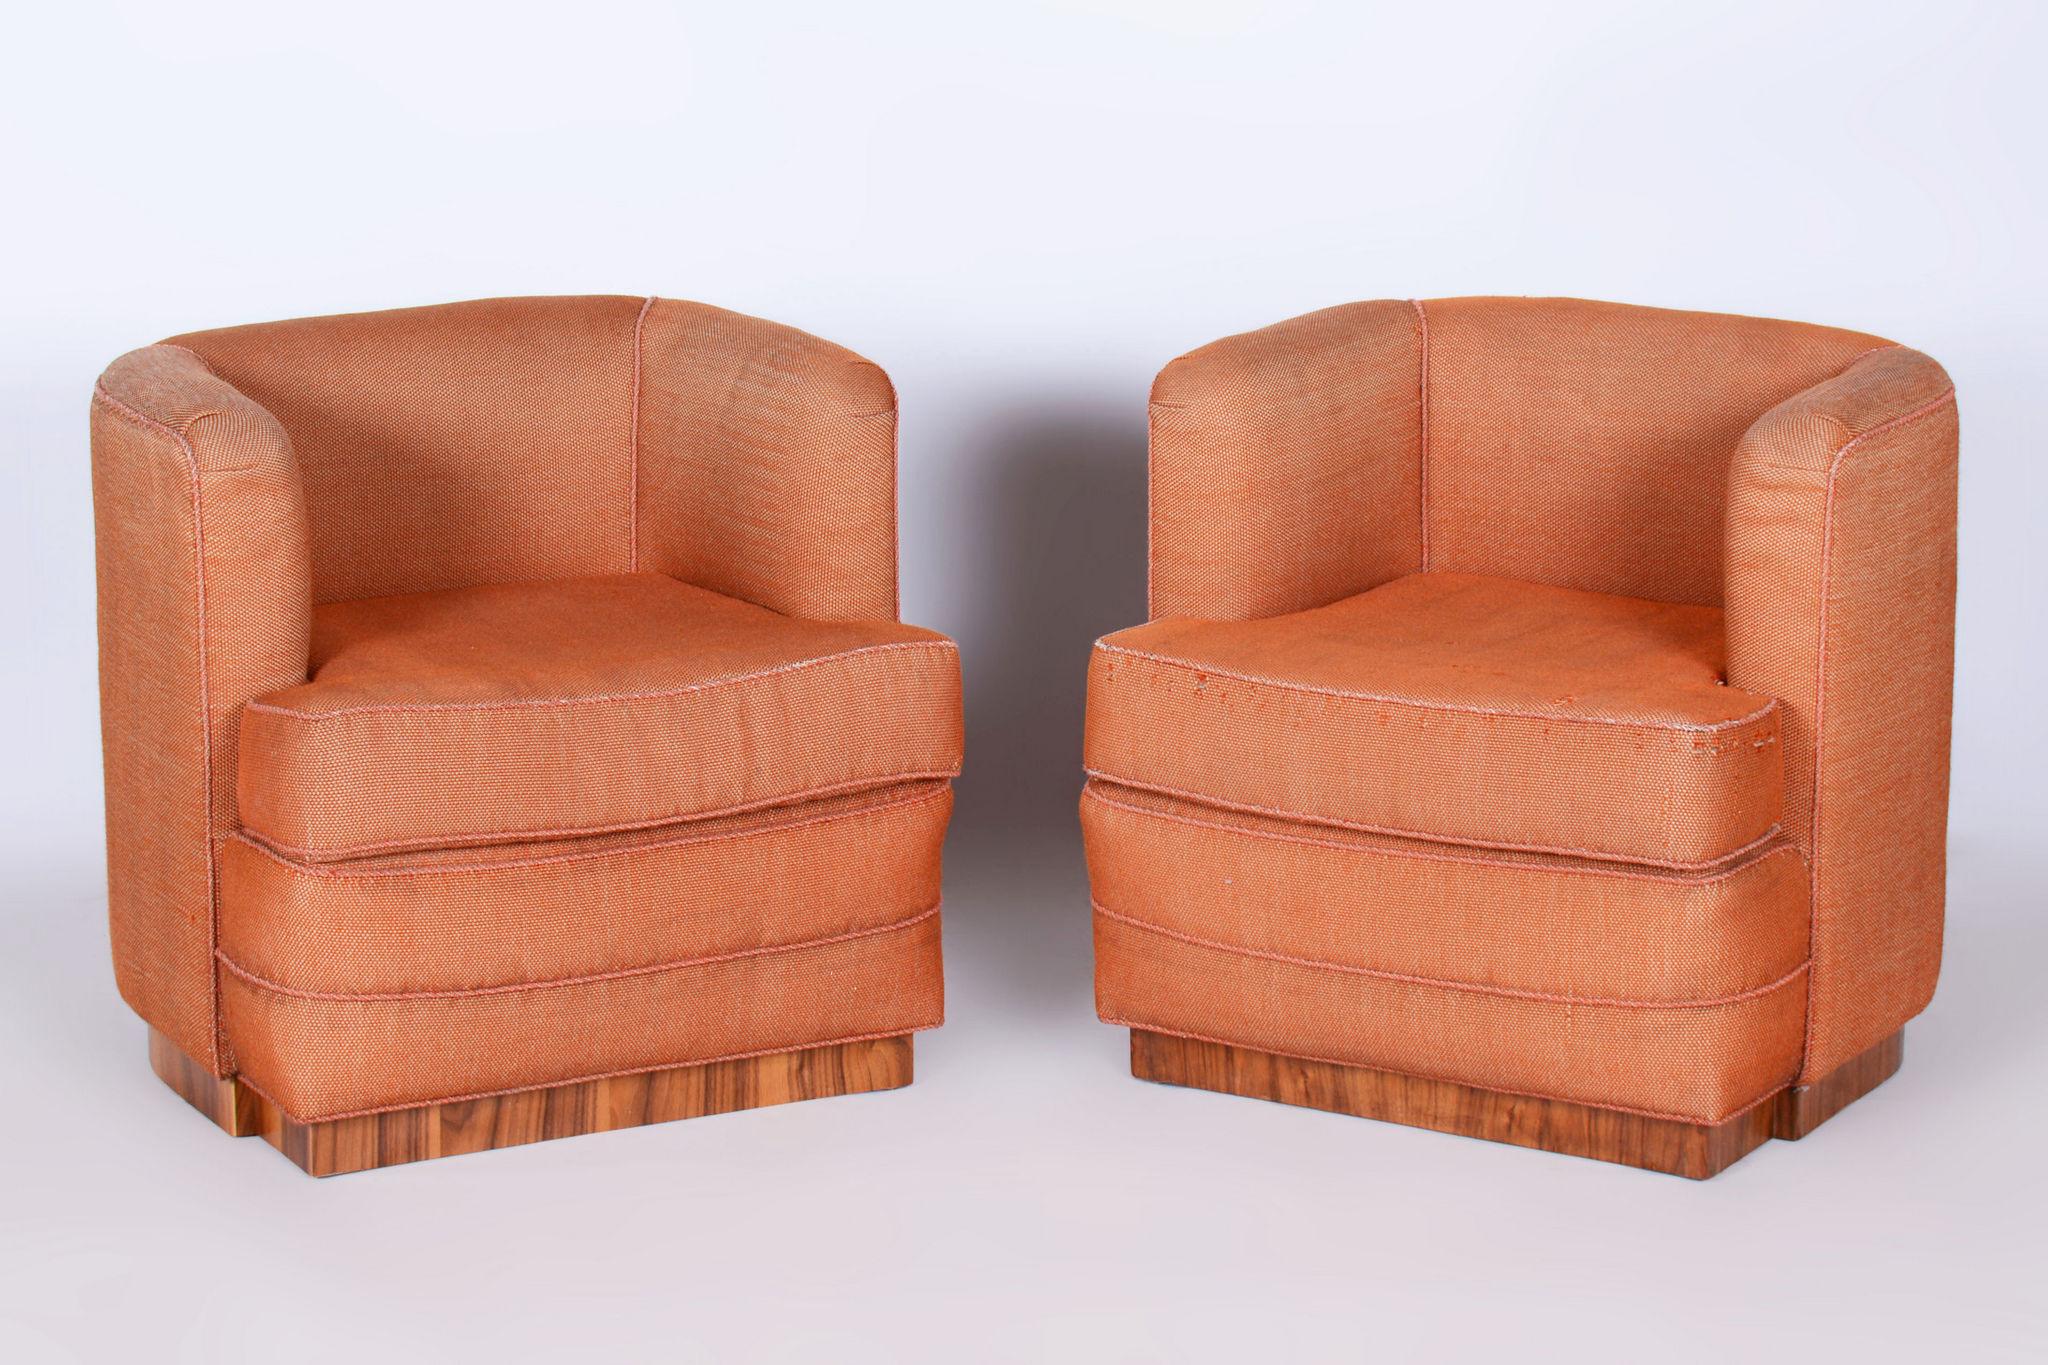 The armchairs come from the interior of the Slavia bank in Czechoslovakia.

Original preserved traditional spring upholstery.

The original cover fabric is slightly repaired, but is in good condition.

It has been re-polished with polyutherane piano